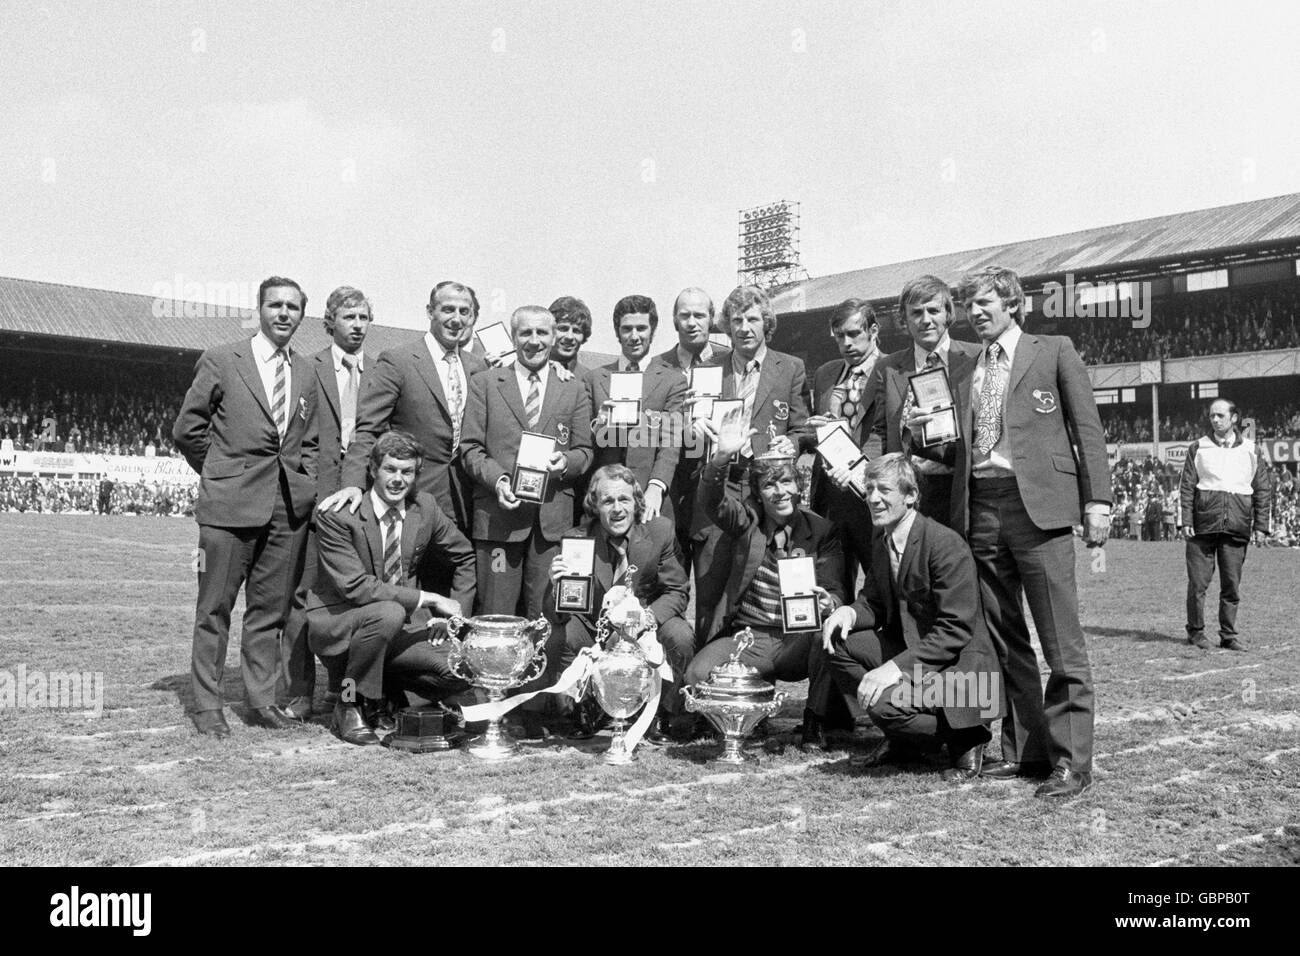 Derby County players show off their League Championship medals aas they pose with the trophies won by the club during the 1971-72 season: (back row, l-r) ?, John McGovern, physio Gordon Guthrie, trainer Jimmy Gordon, Ron Webster, John Robson, Terry Hennessey, Alan Hinton, John O'Hare, Colin Boulton, Alan Durban; (front row, l-r) Peter Daniel, Archie Gemmill, Kevin Hector, ?; (trophies, l-r) Central League, Football League Championship, Texaco Cup Stock Photo